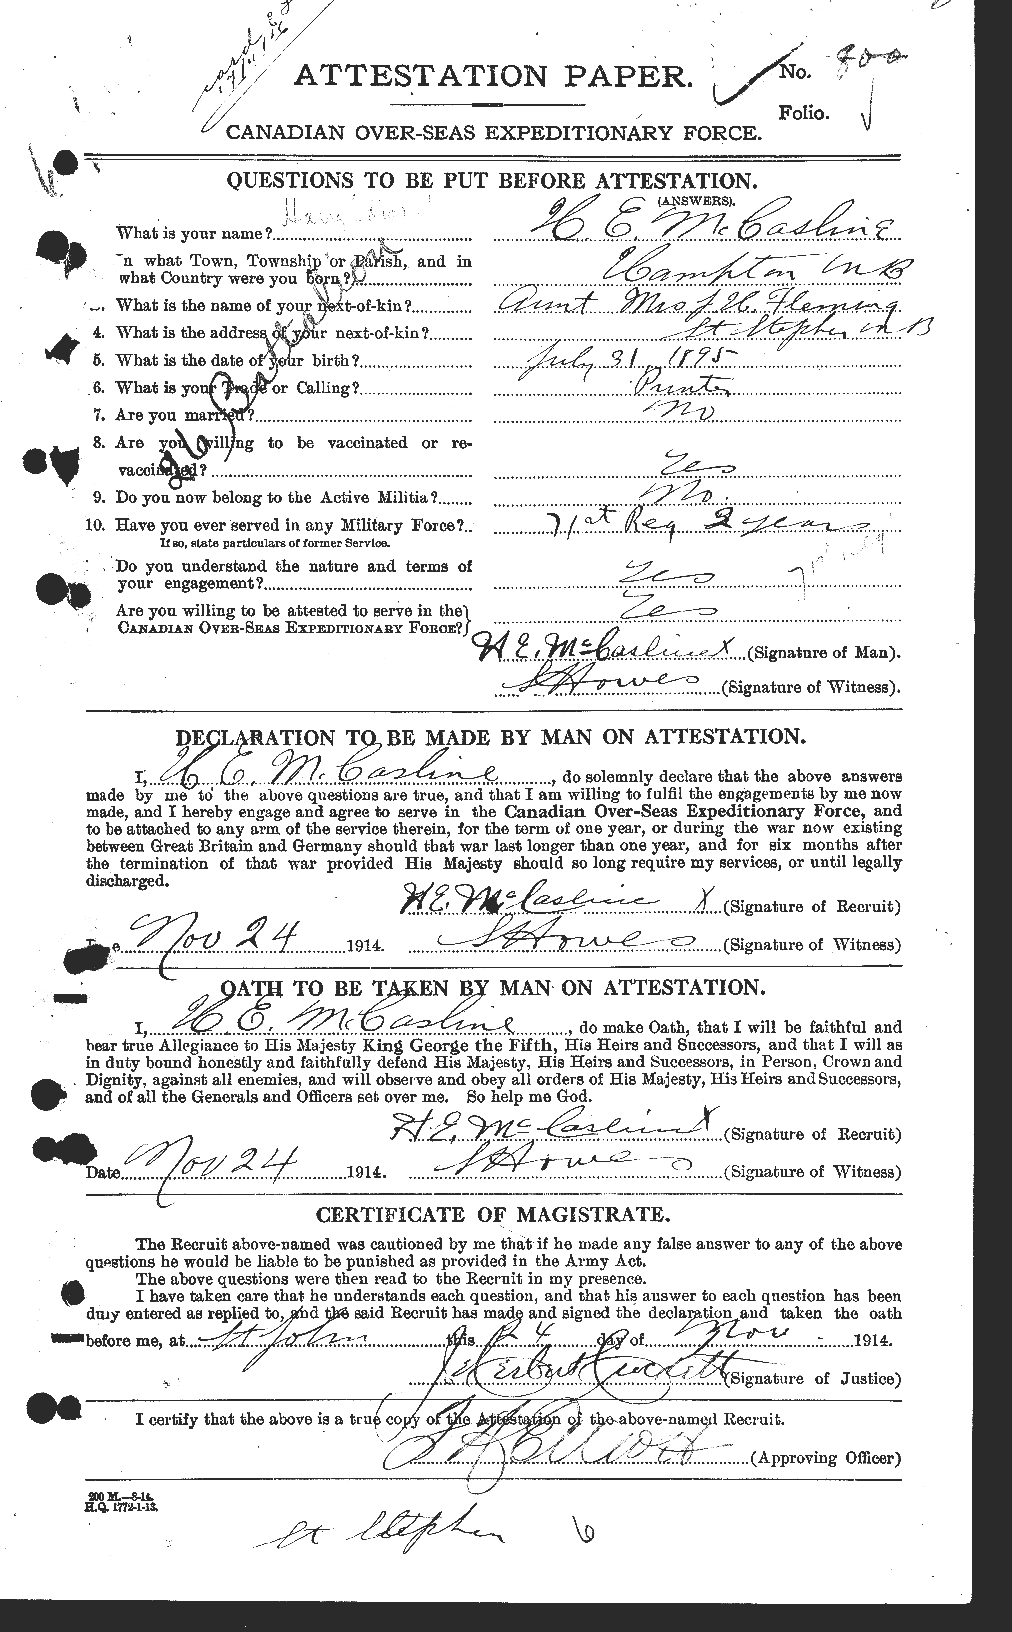 Personnel Records of the First World War - CEF 133199a